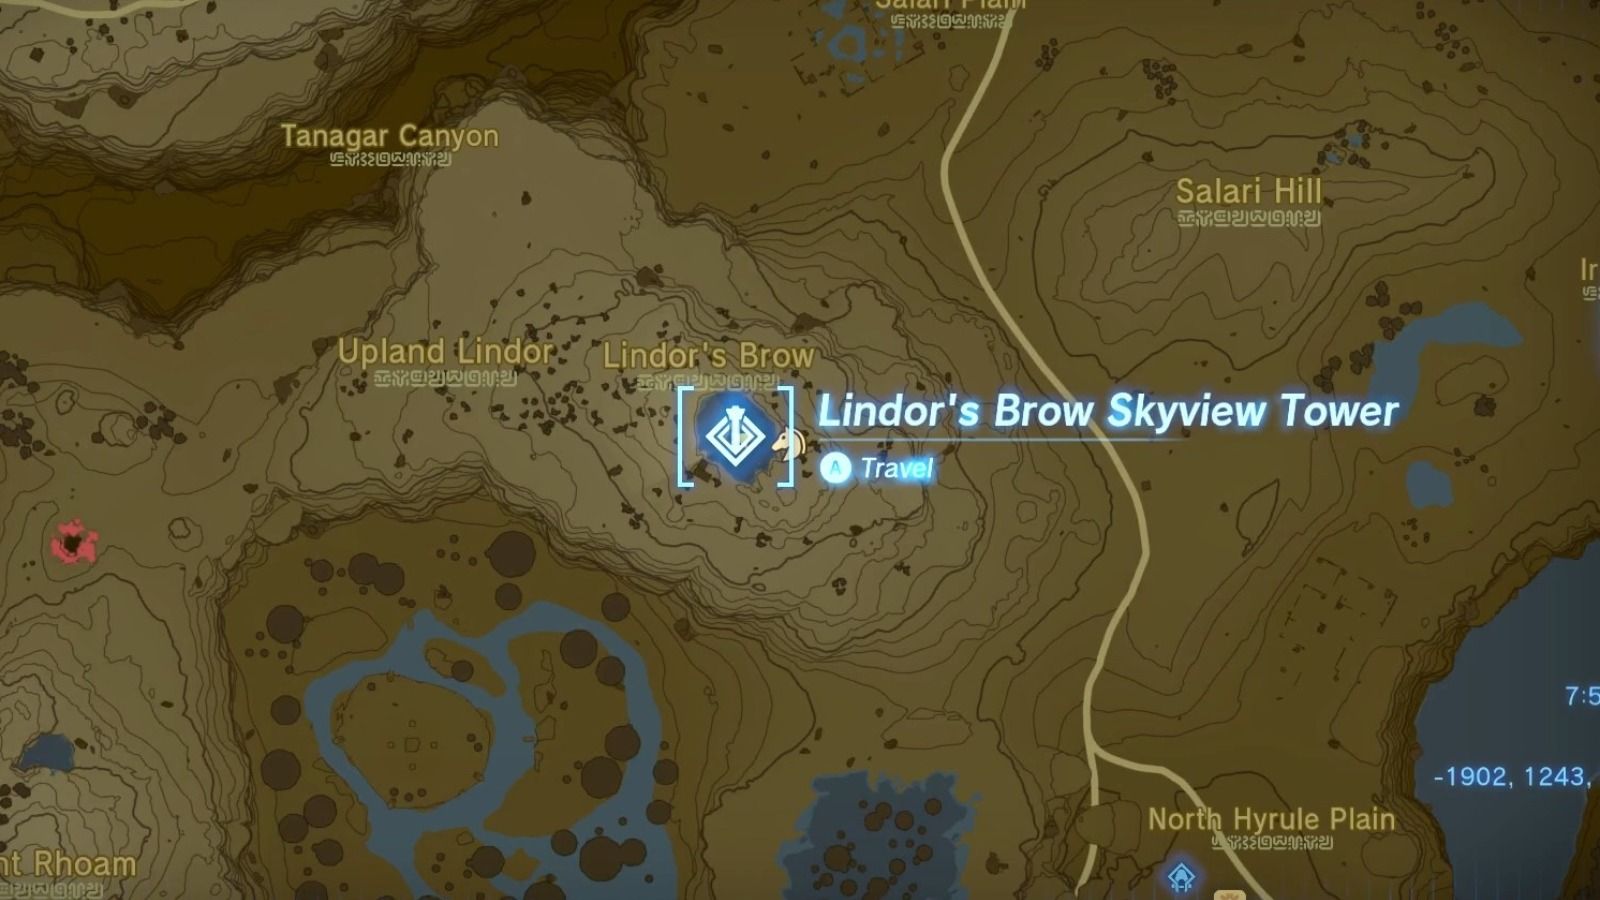 An image of the bridge to Lindor's Brow Skyview Tower in Zelda Tears of the Kingdom.